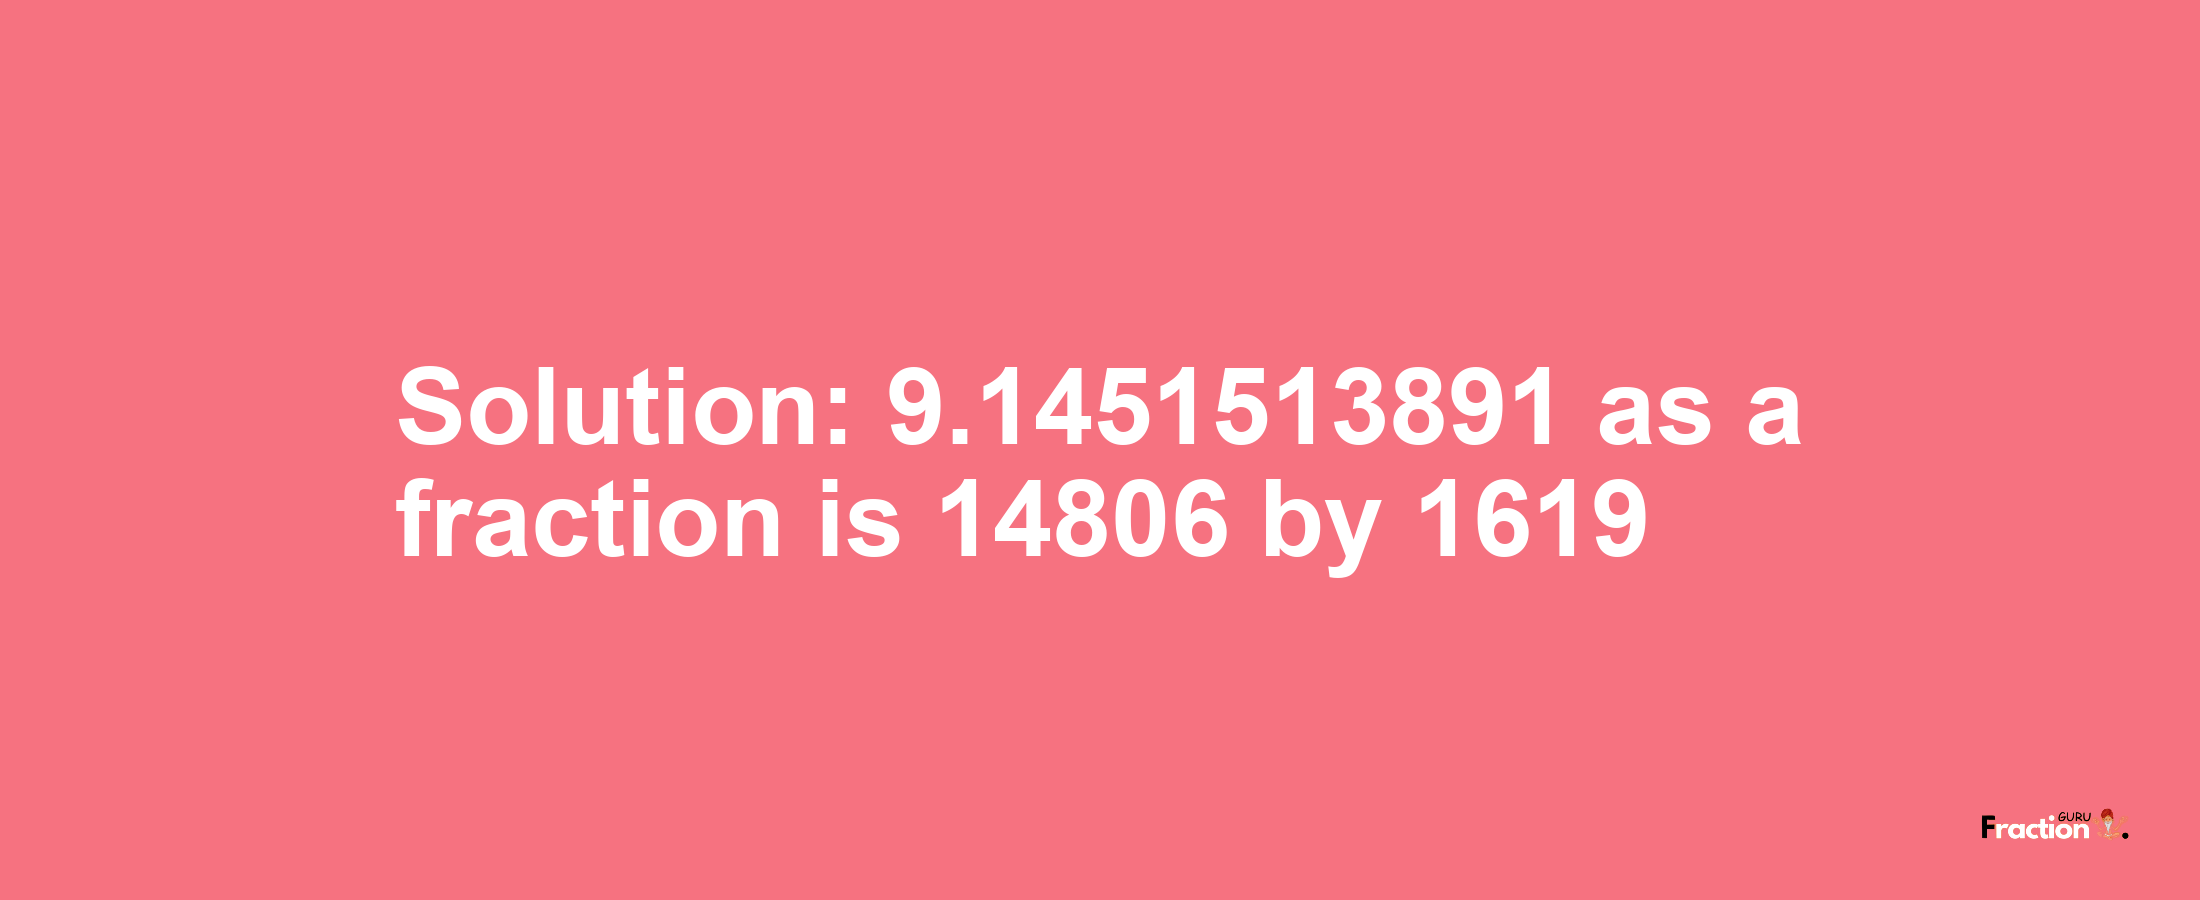 Solution:9.1451513891 as a fraction is 14806/1619